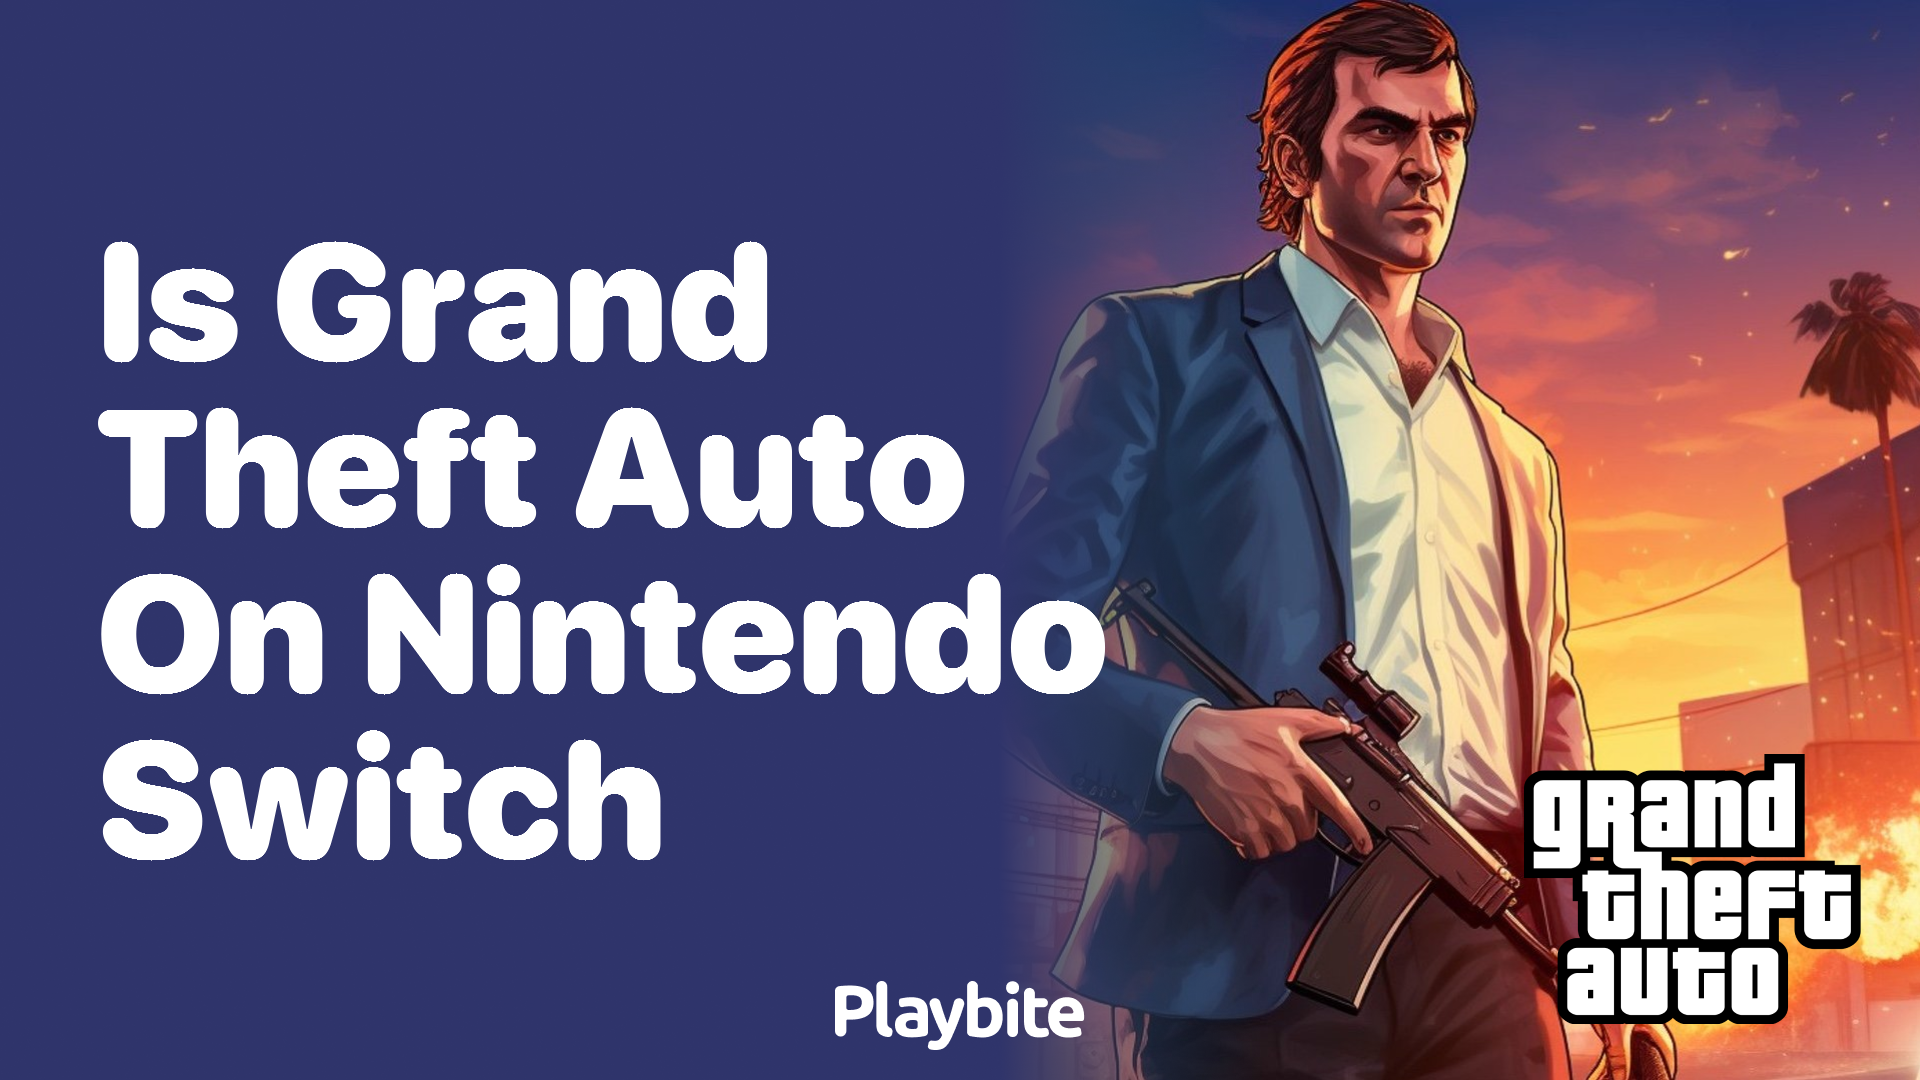 Is Grand Theft Auto available on Nintendo Switch?